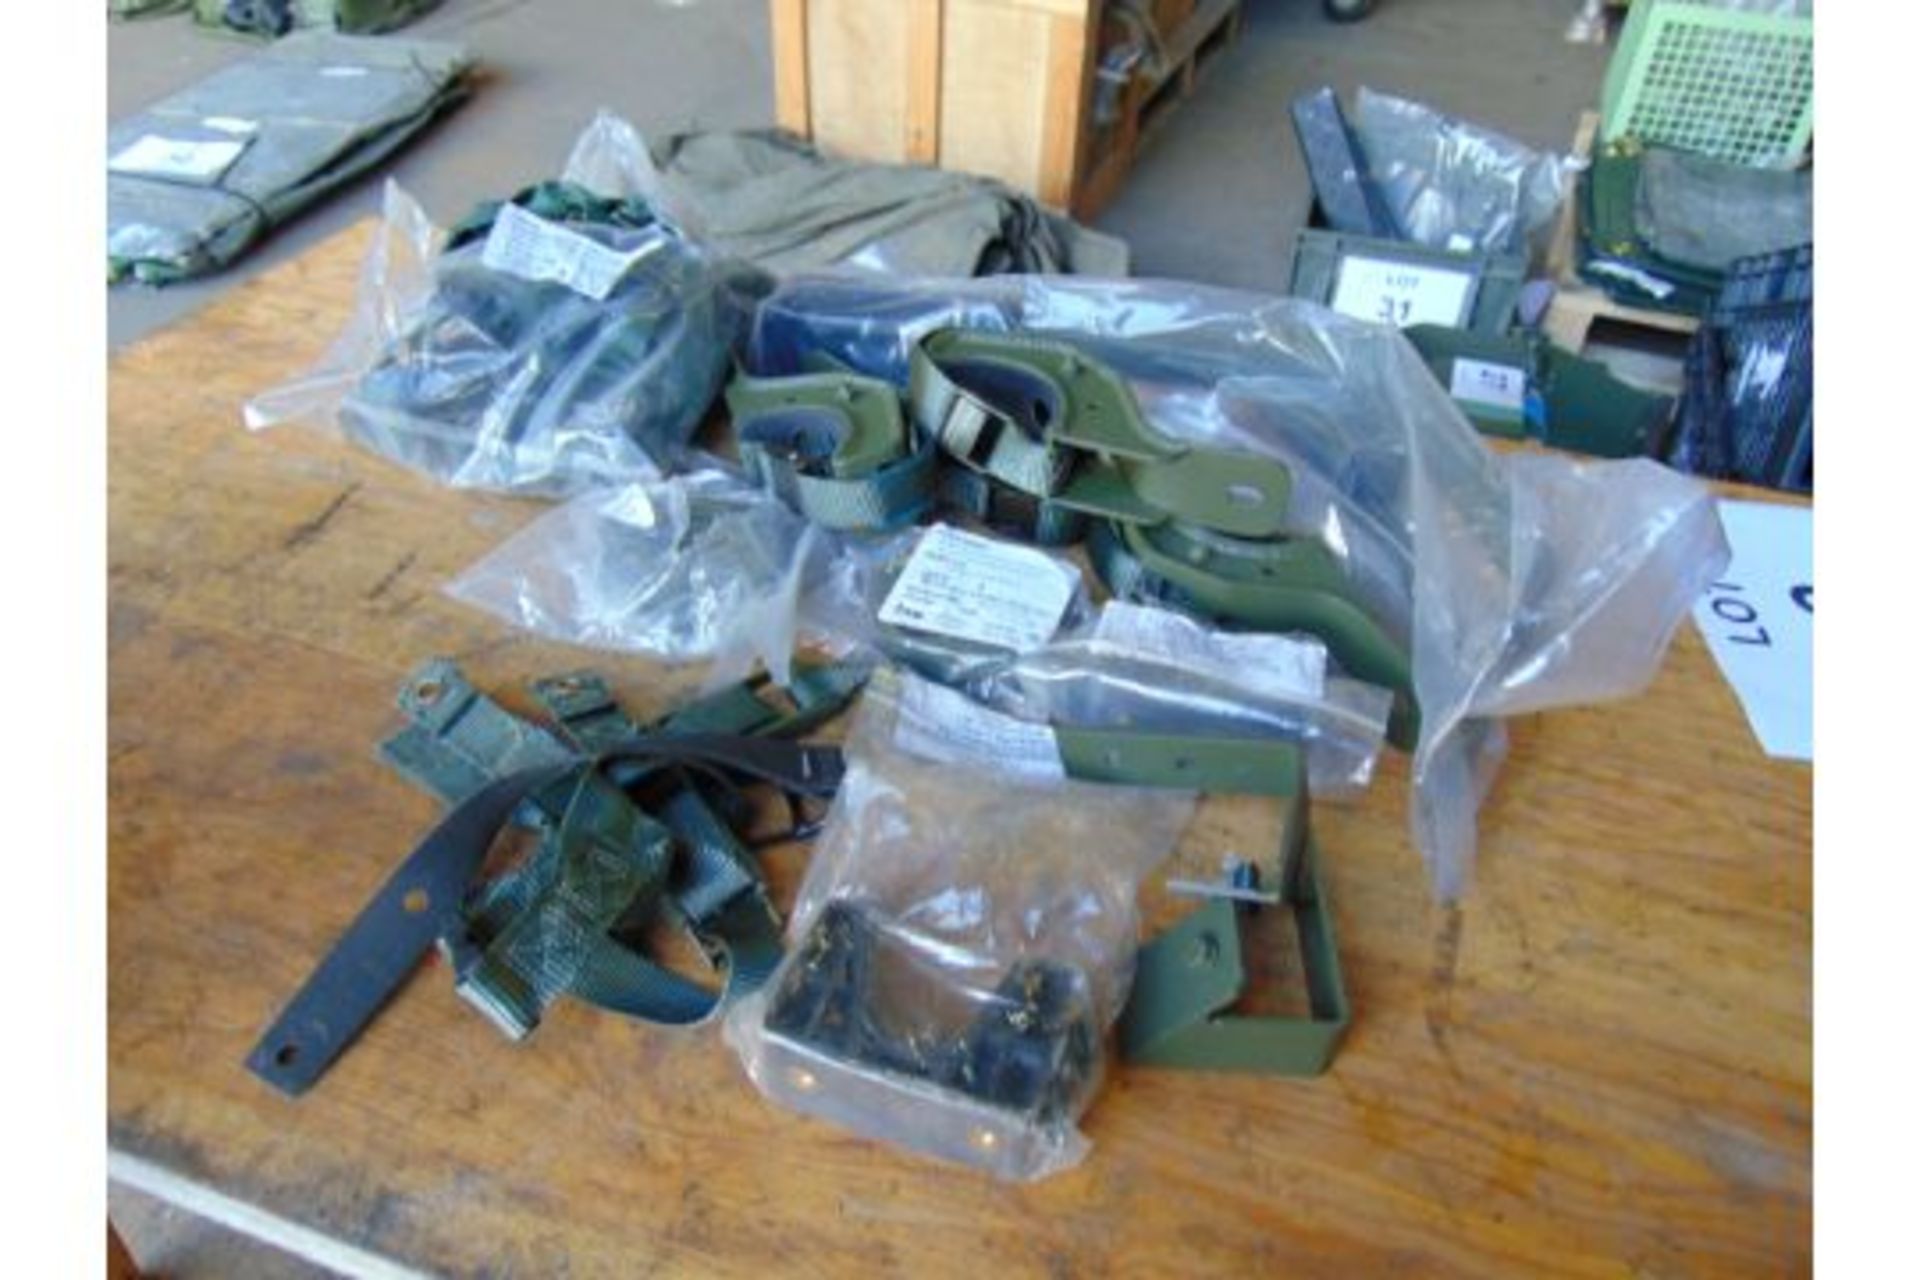 New Unissued WIMIK SA 80 Clips Launcher Covers, Stowage Straps, Barrel Clamps etc - Image 2 of 8